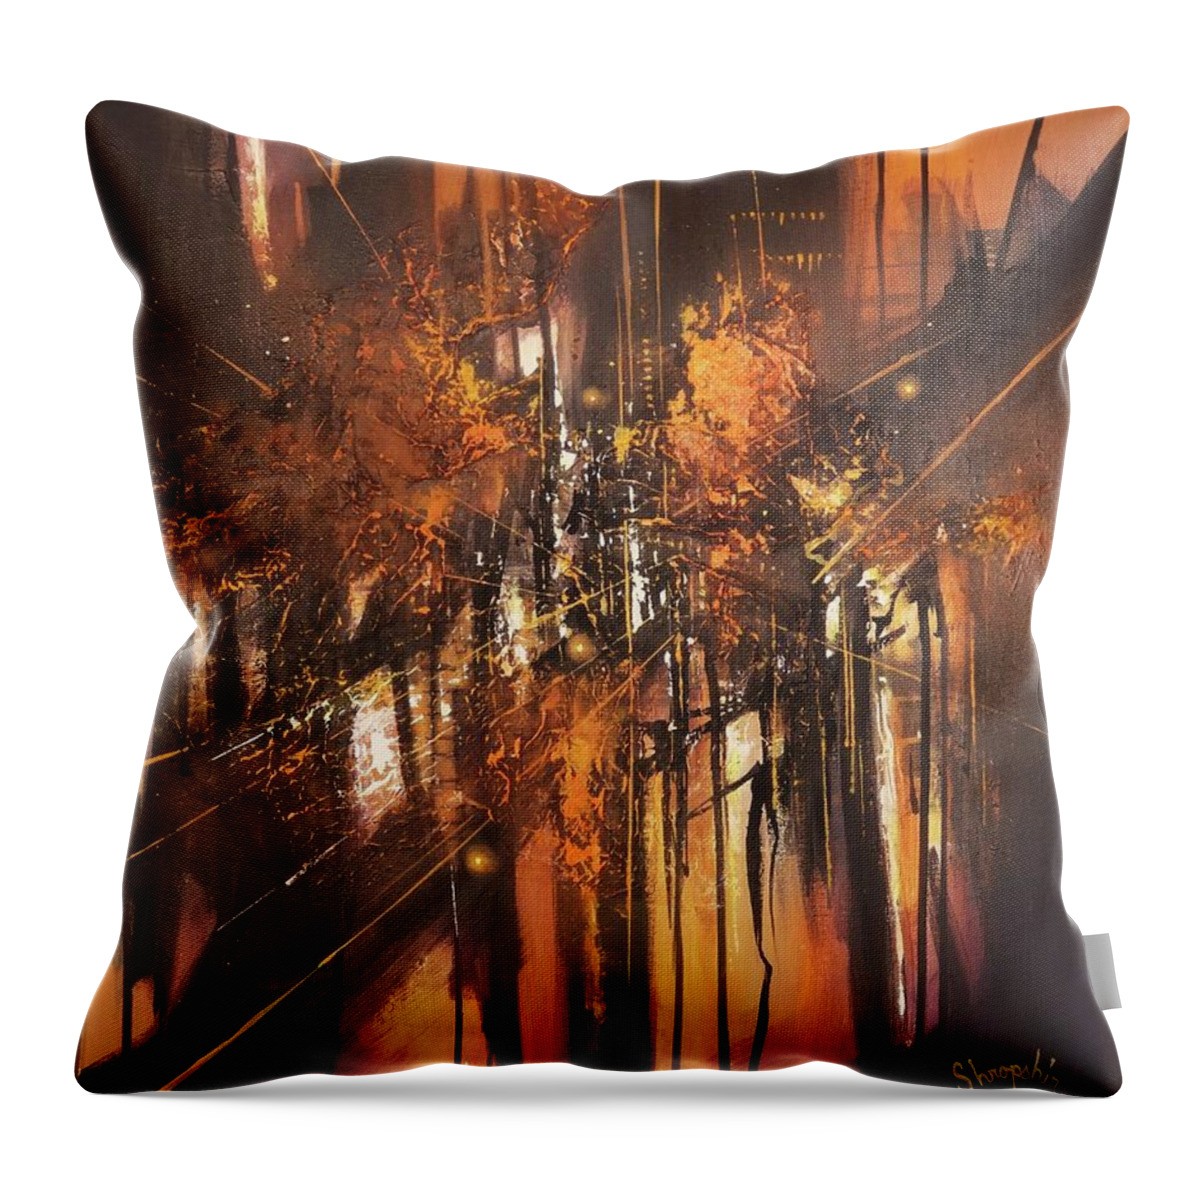 Abstract Throw Pillow featuring the painting Urban Nocturne by Tom Shropshire